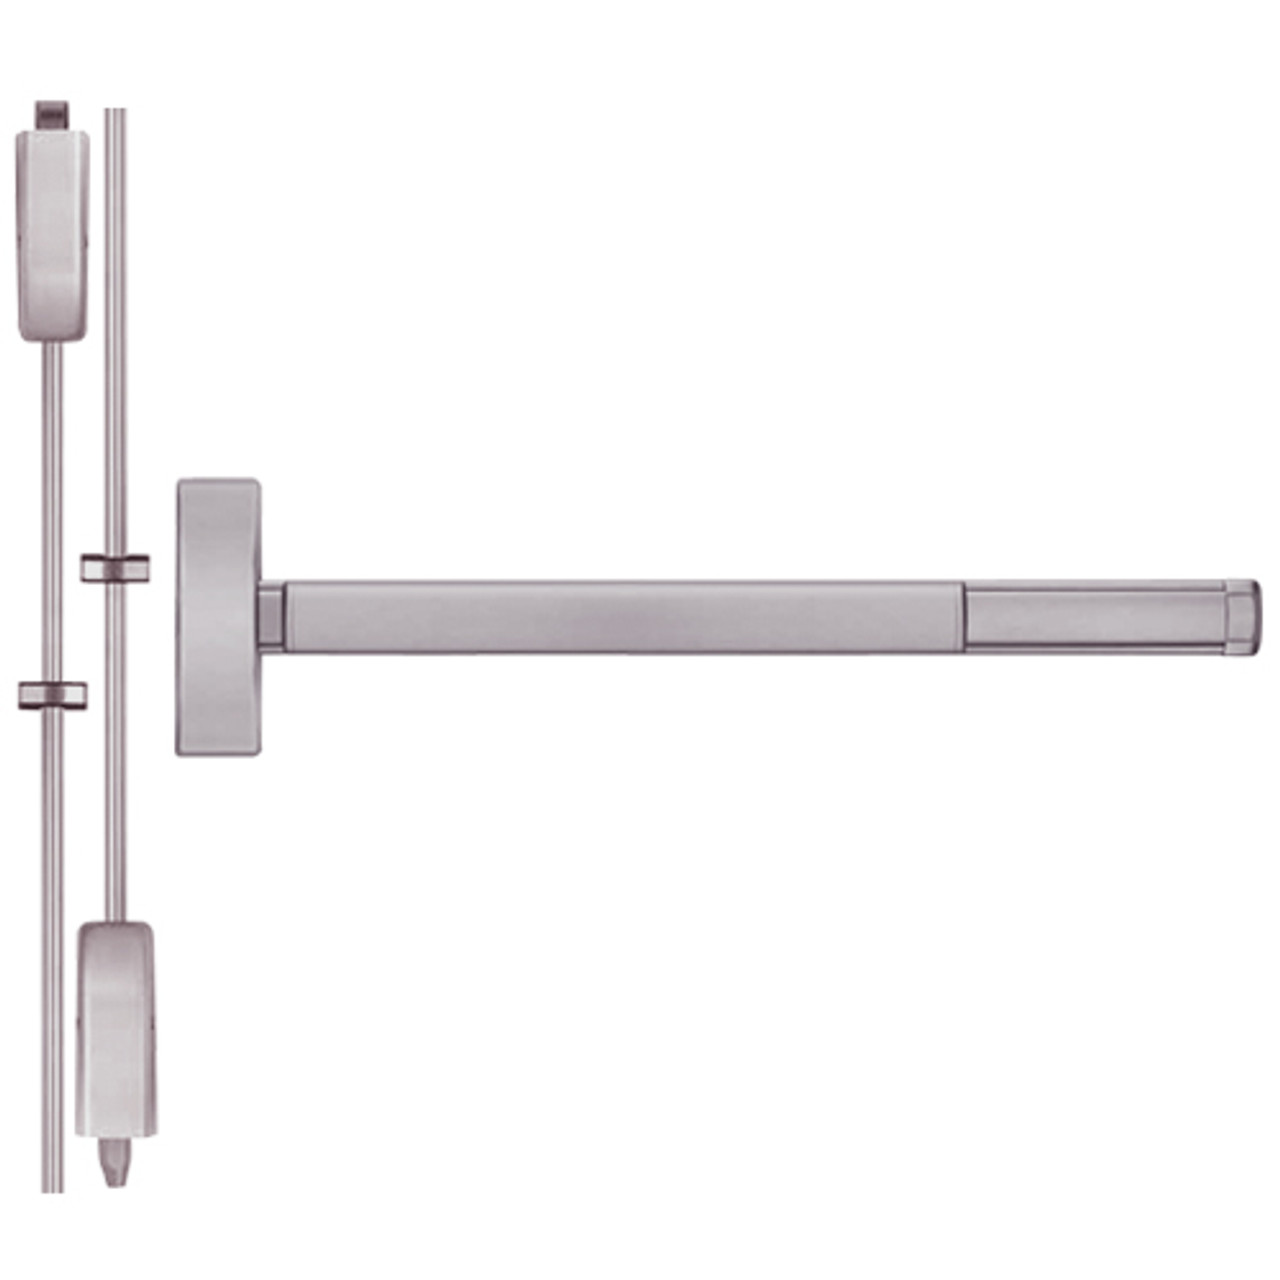 DEFL2208LBR-630-48 PHI 2200 Series Fire Rated Apex Surface Vertical Rod Device with Delayed Egress Prepped for Key Controls Lever/Knob in Satin Stainless Steel Finish